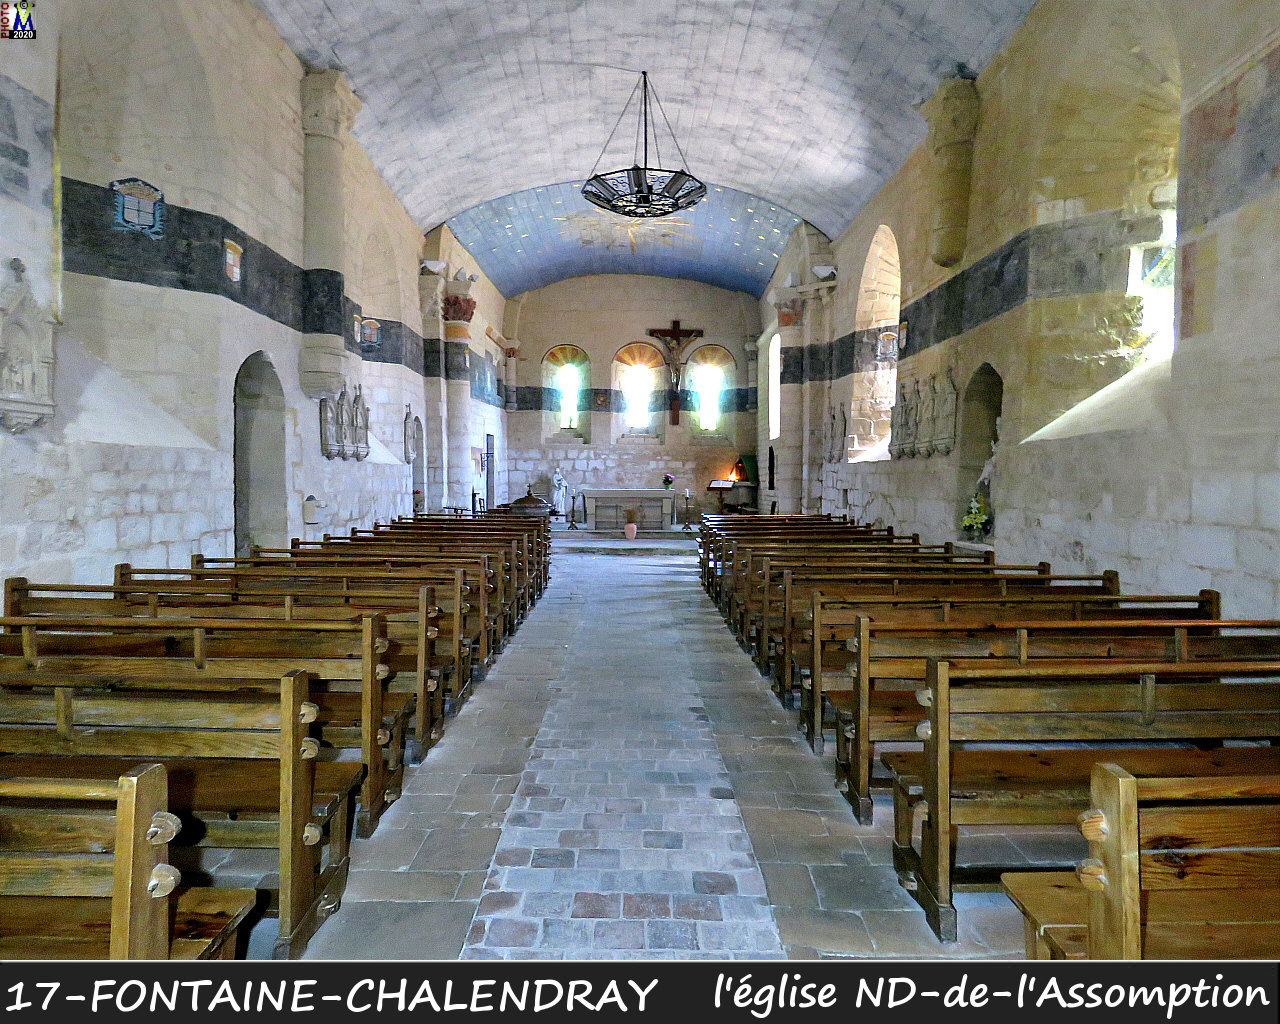 17FONTAINE-CHALENDRAY_eglise_1100.jpg